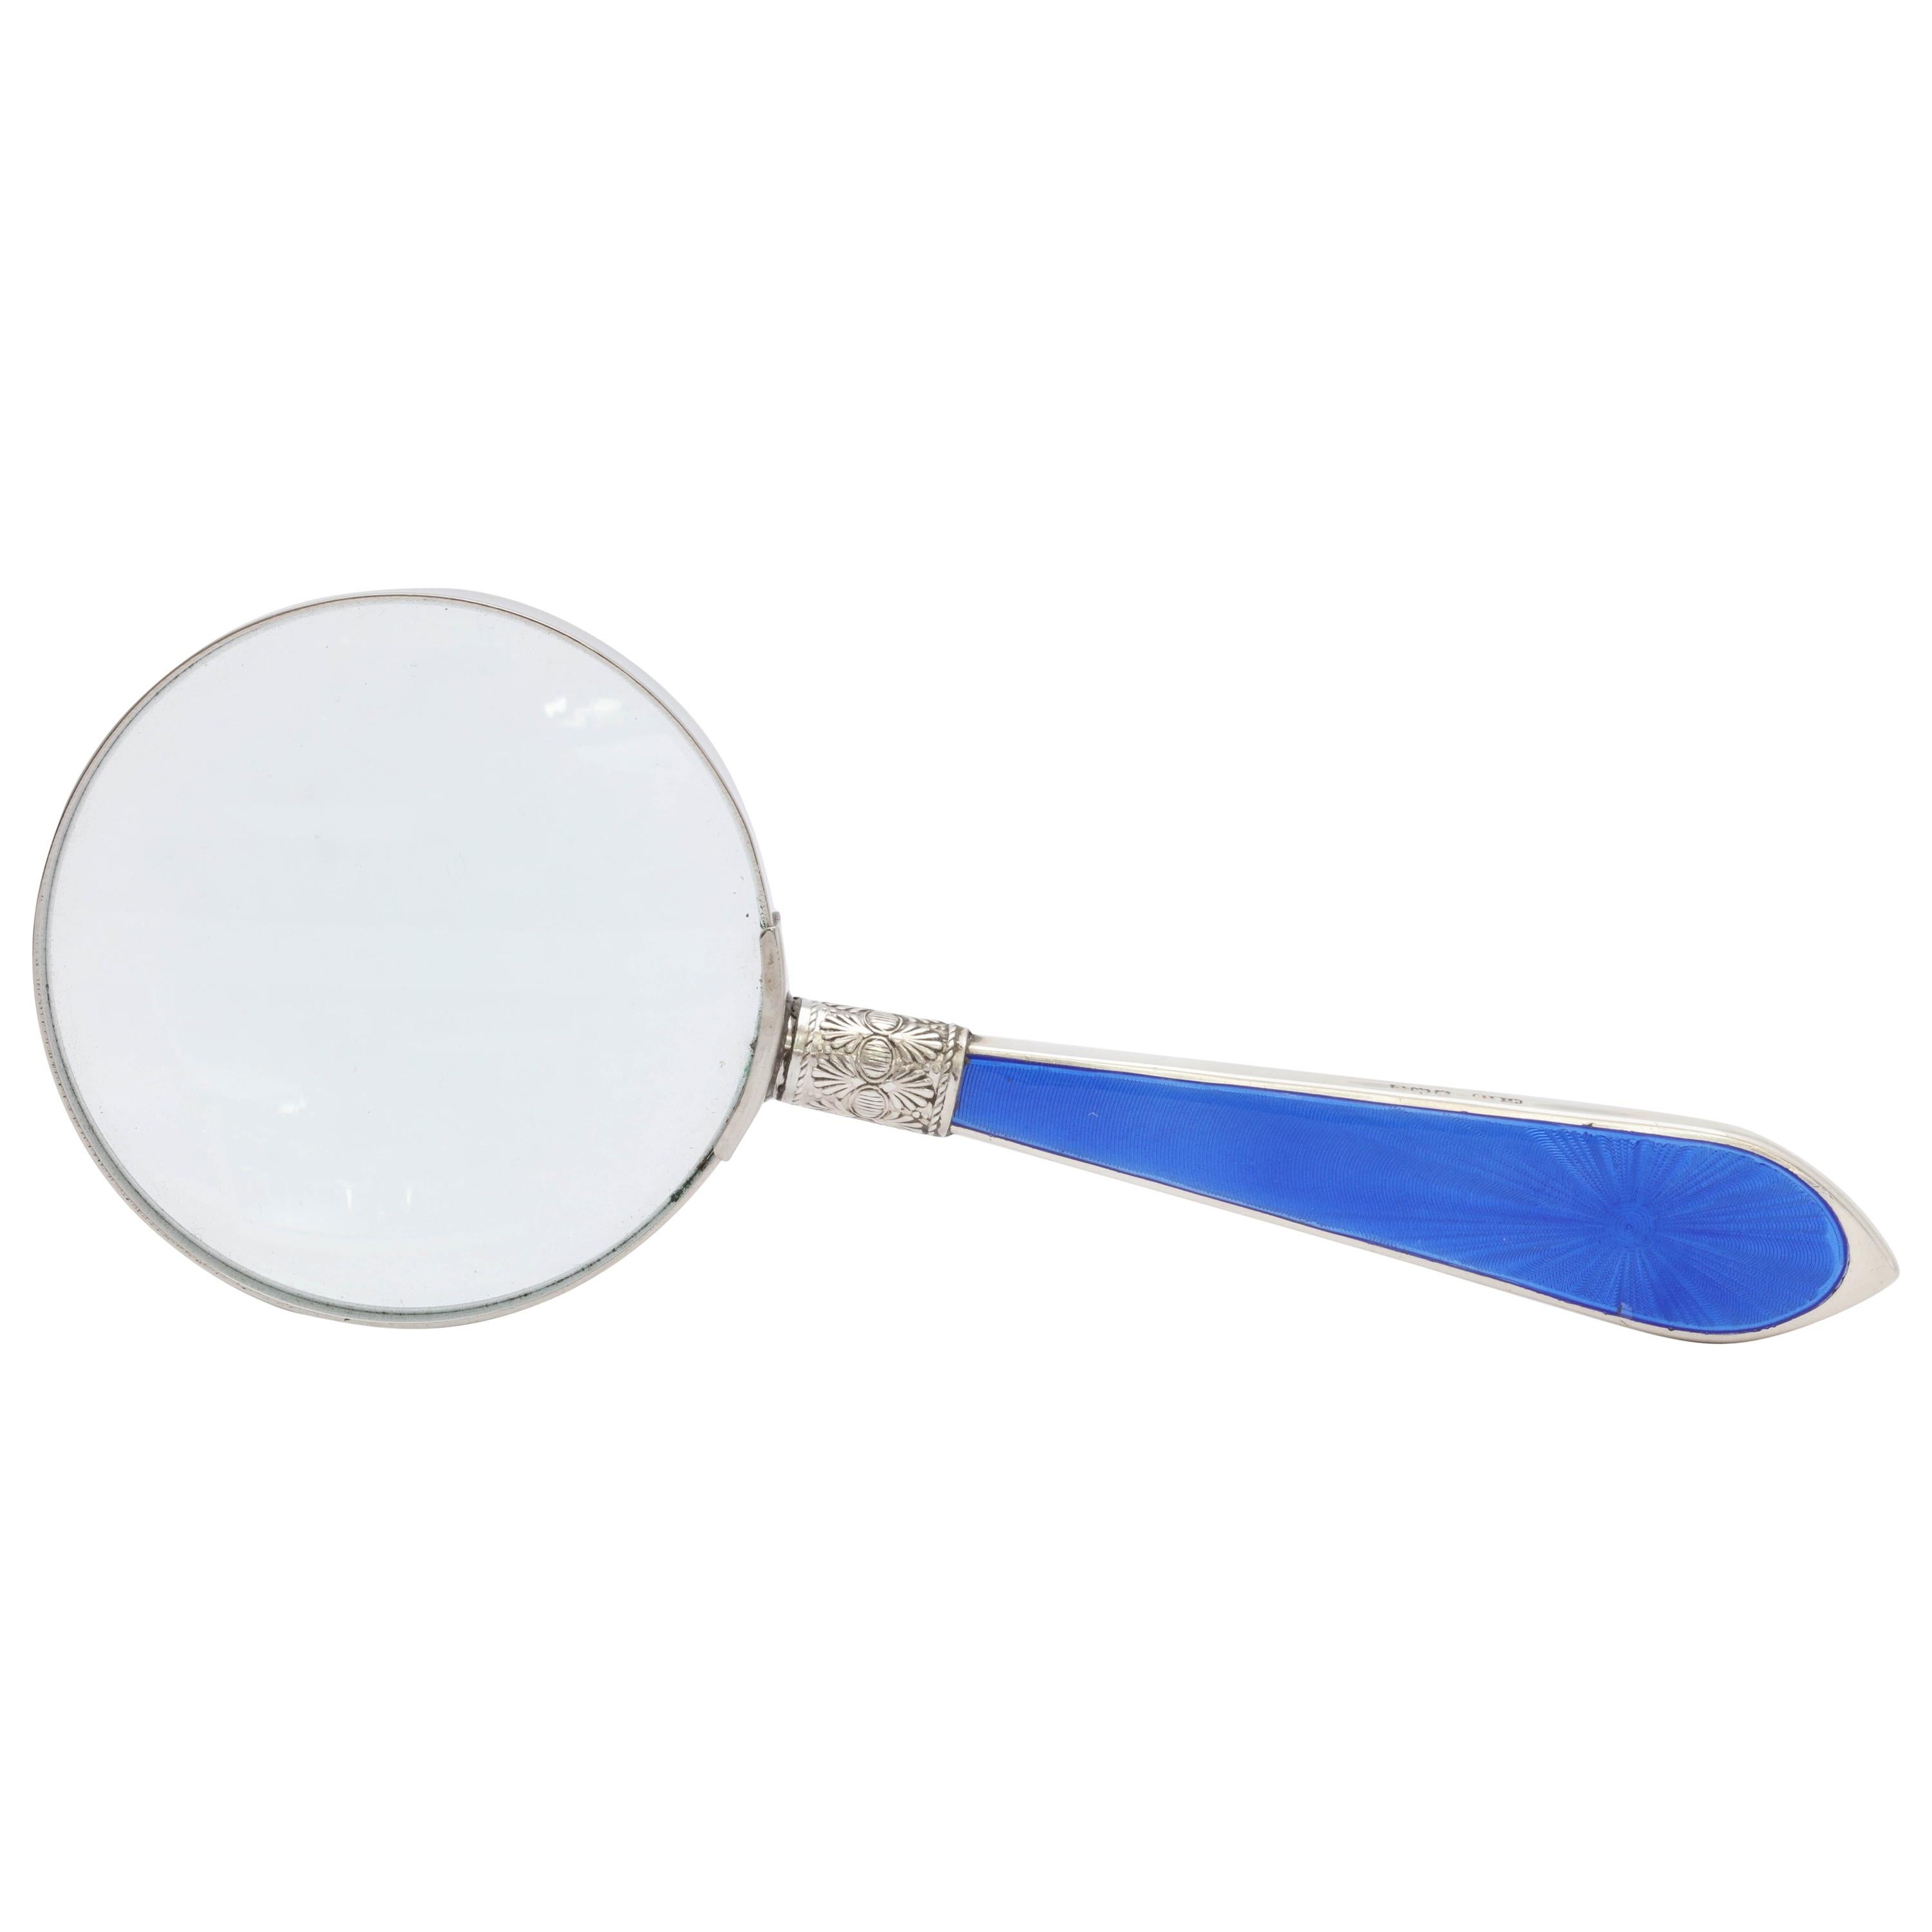 Art Deco Sterling Silver and Deep Blue Guilloche Enamel-Mounted Magnifying Glass